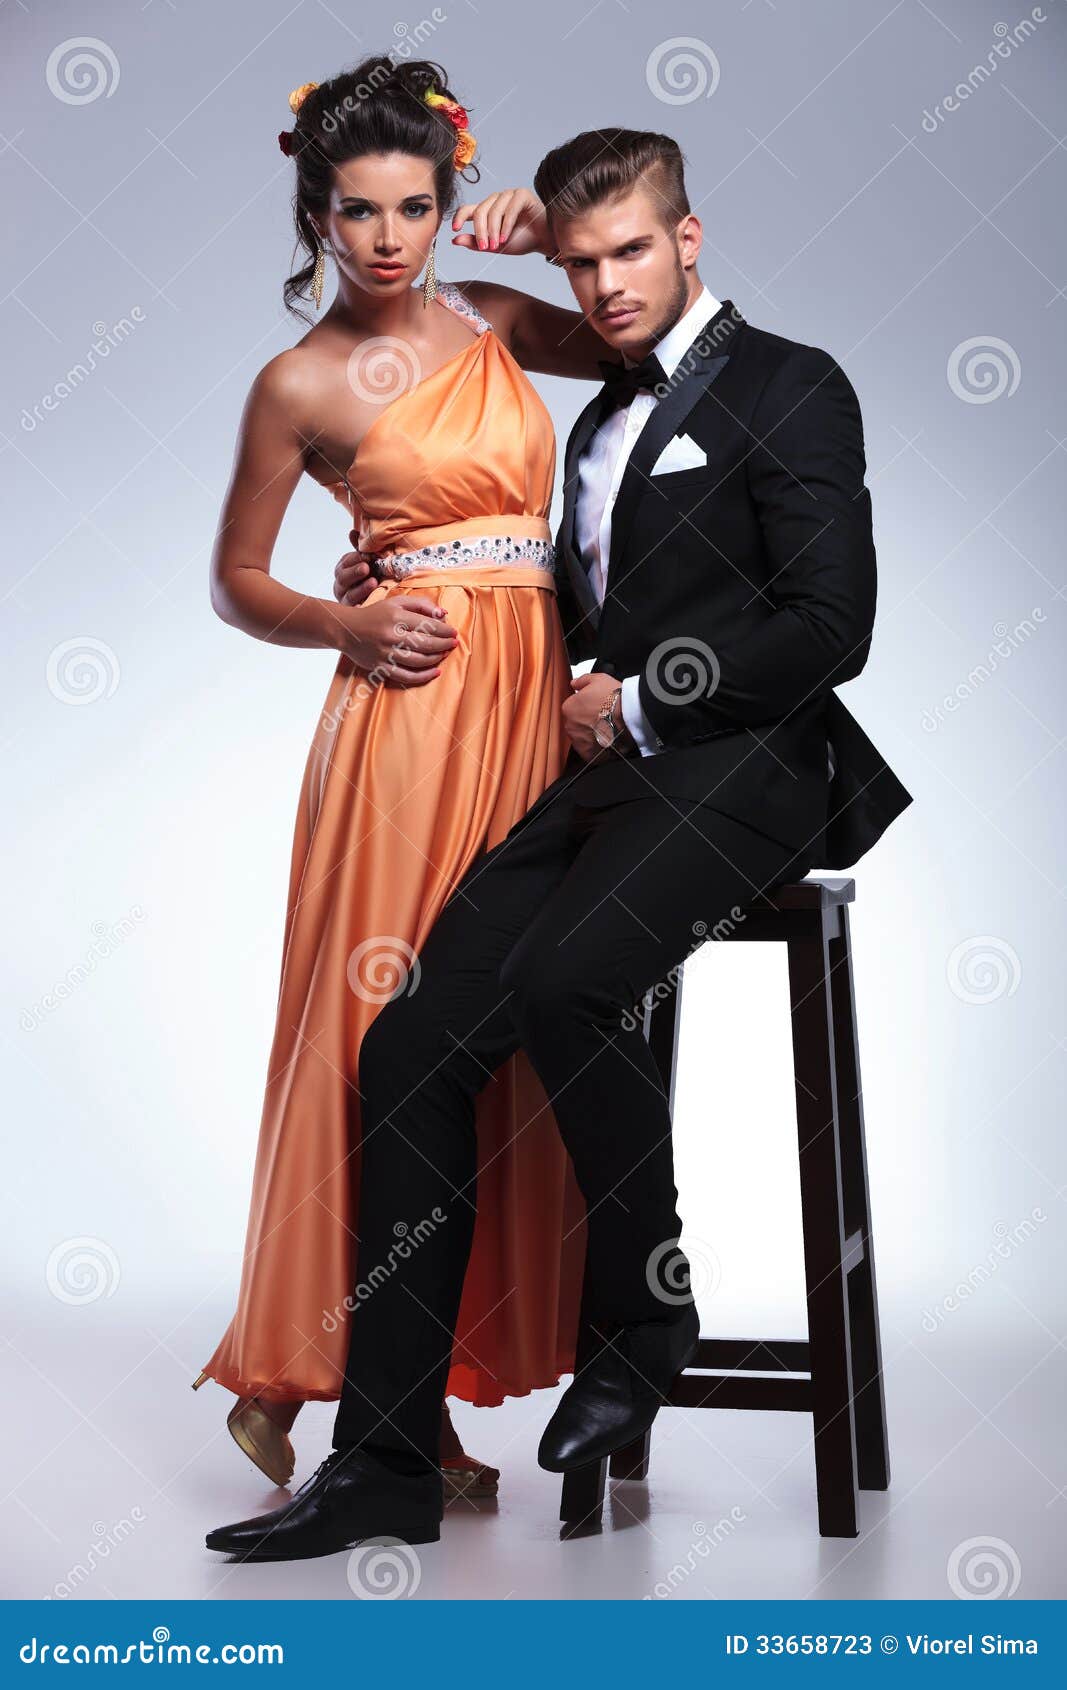 Fashion Couple With Man On Chair Stock Photos - Image 